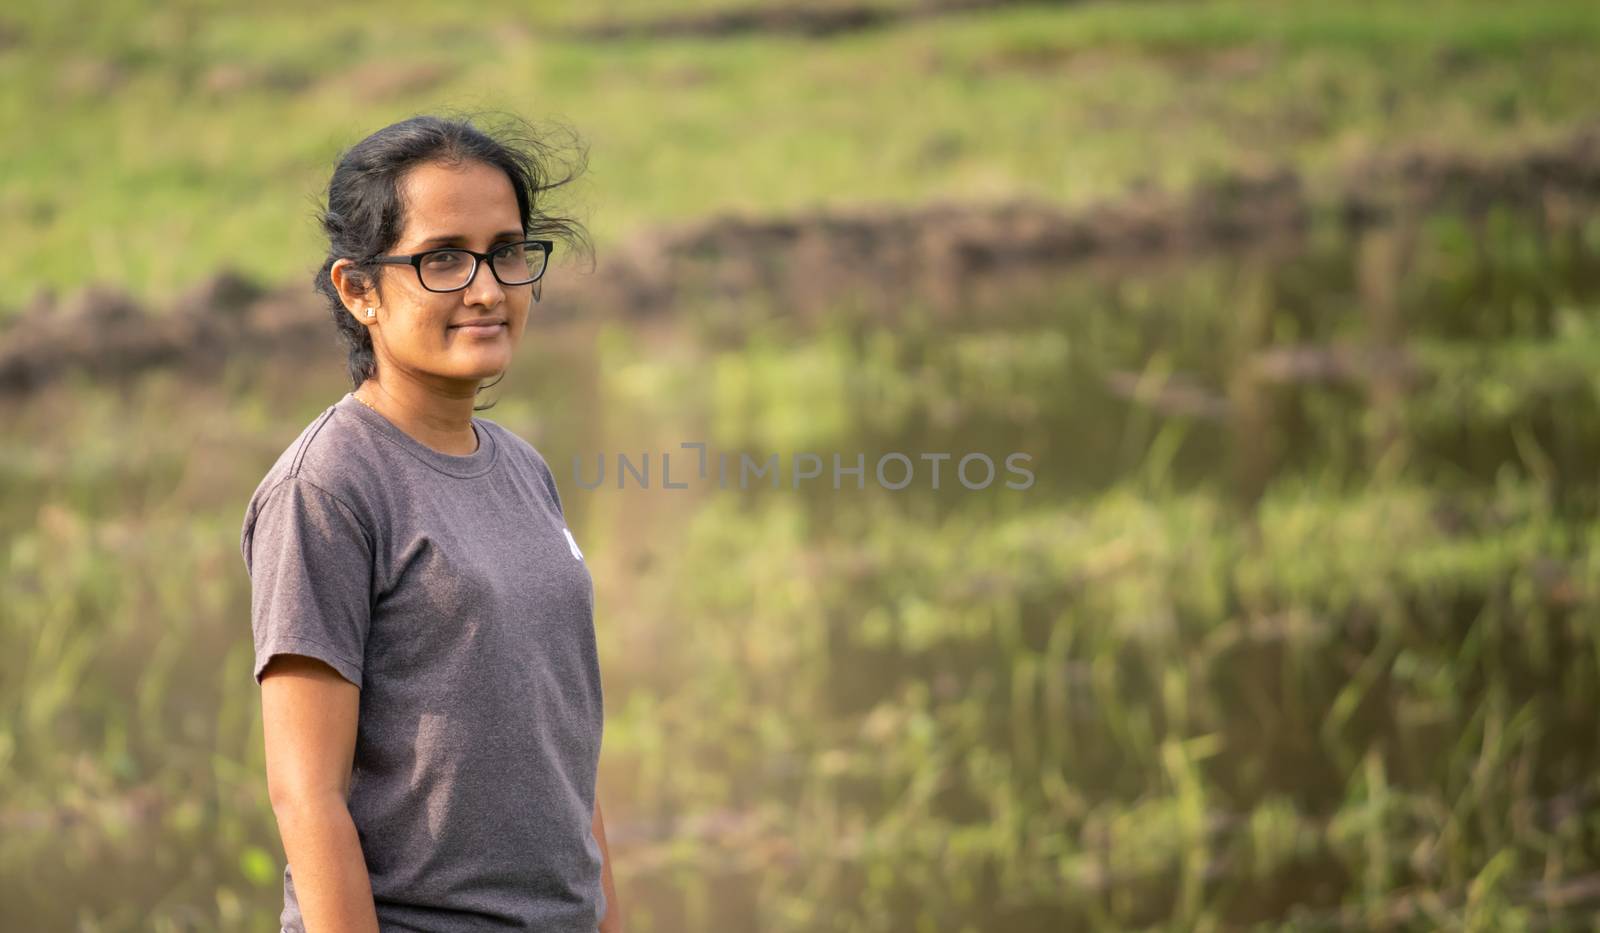 Southern Province / Sri Lanka - 10 24 2020: Young beautiful innocent female pose for the camera in front of the rice paddy field in a rural village.